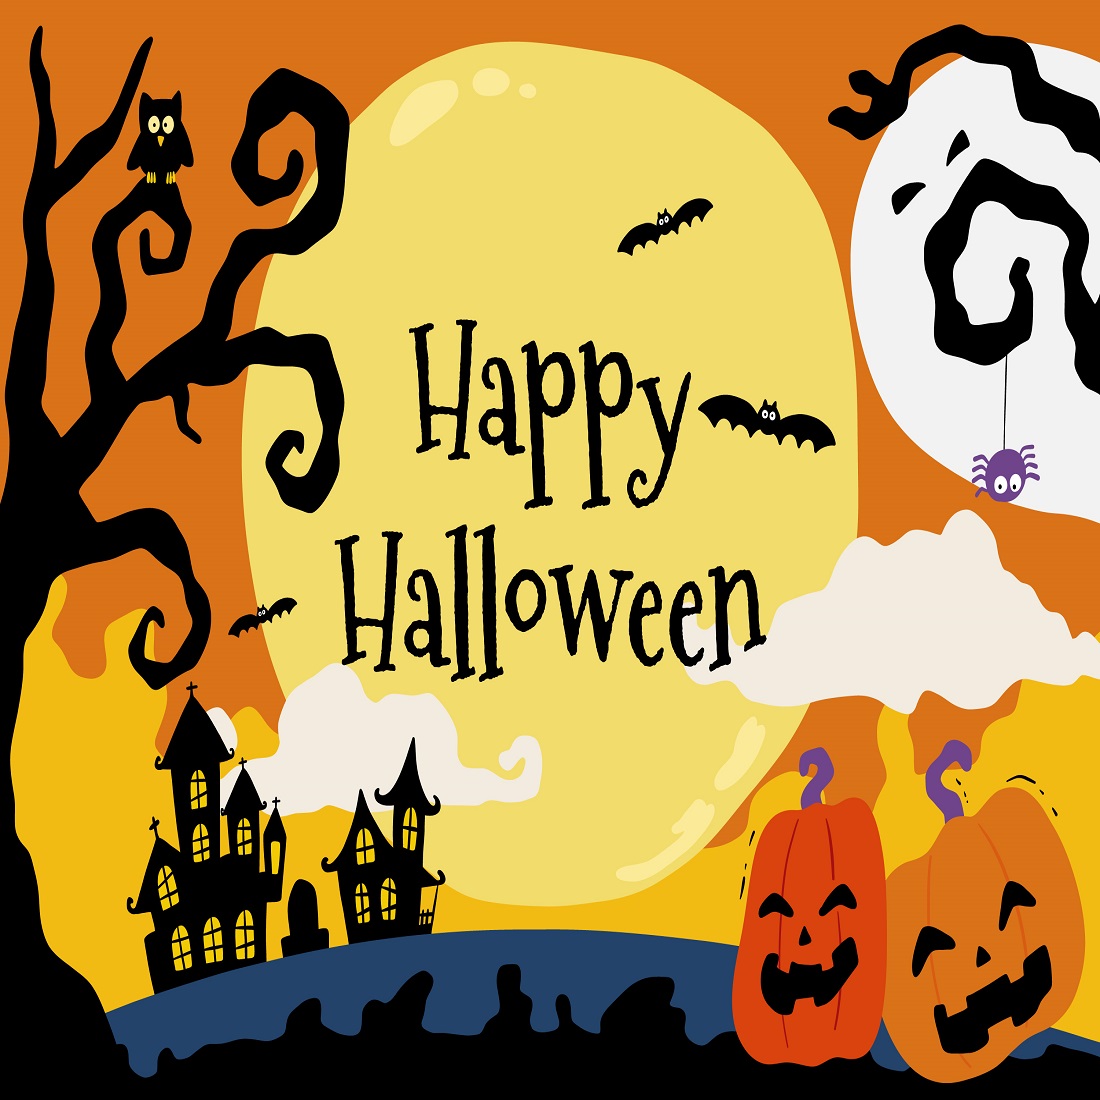 Happy Halloween background preview image.